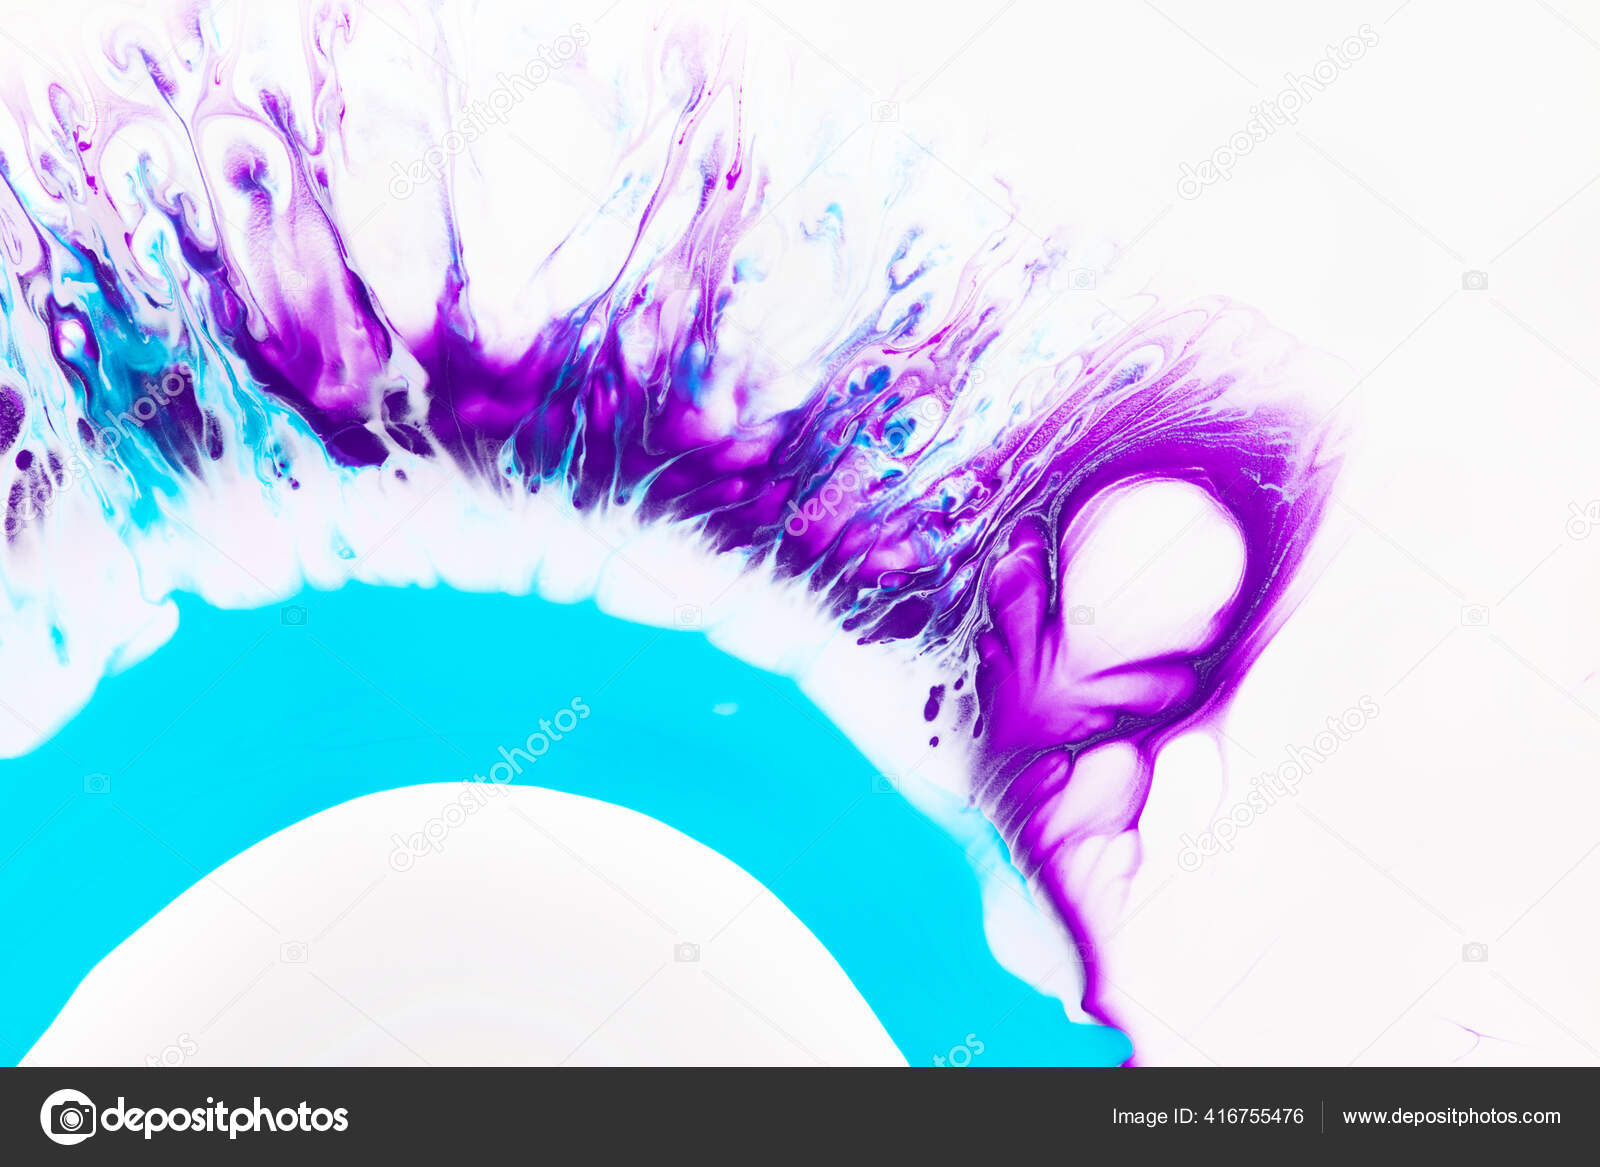 Fluid art texture. Backdrop with abstract iridescent paint effect